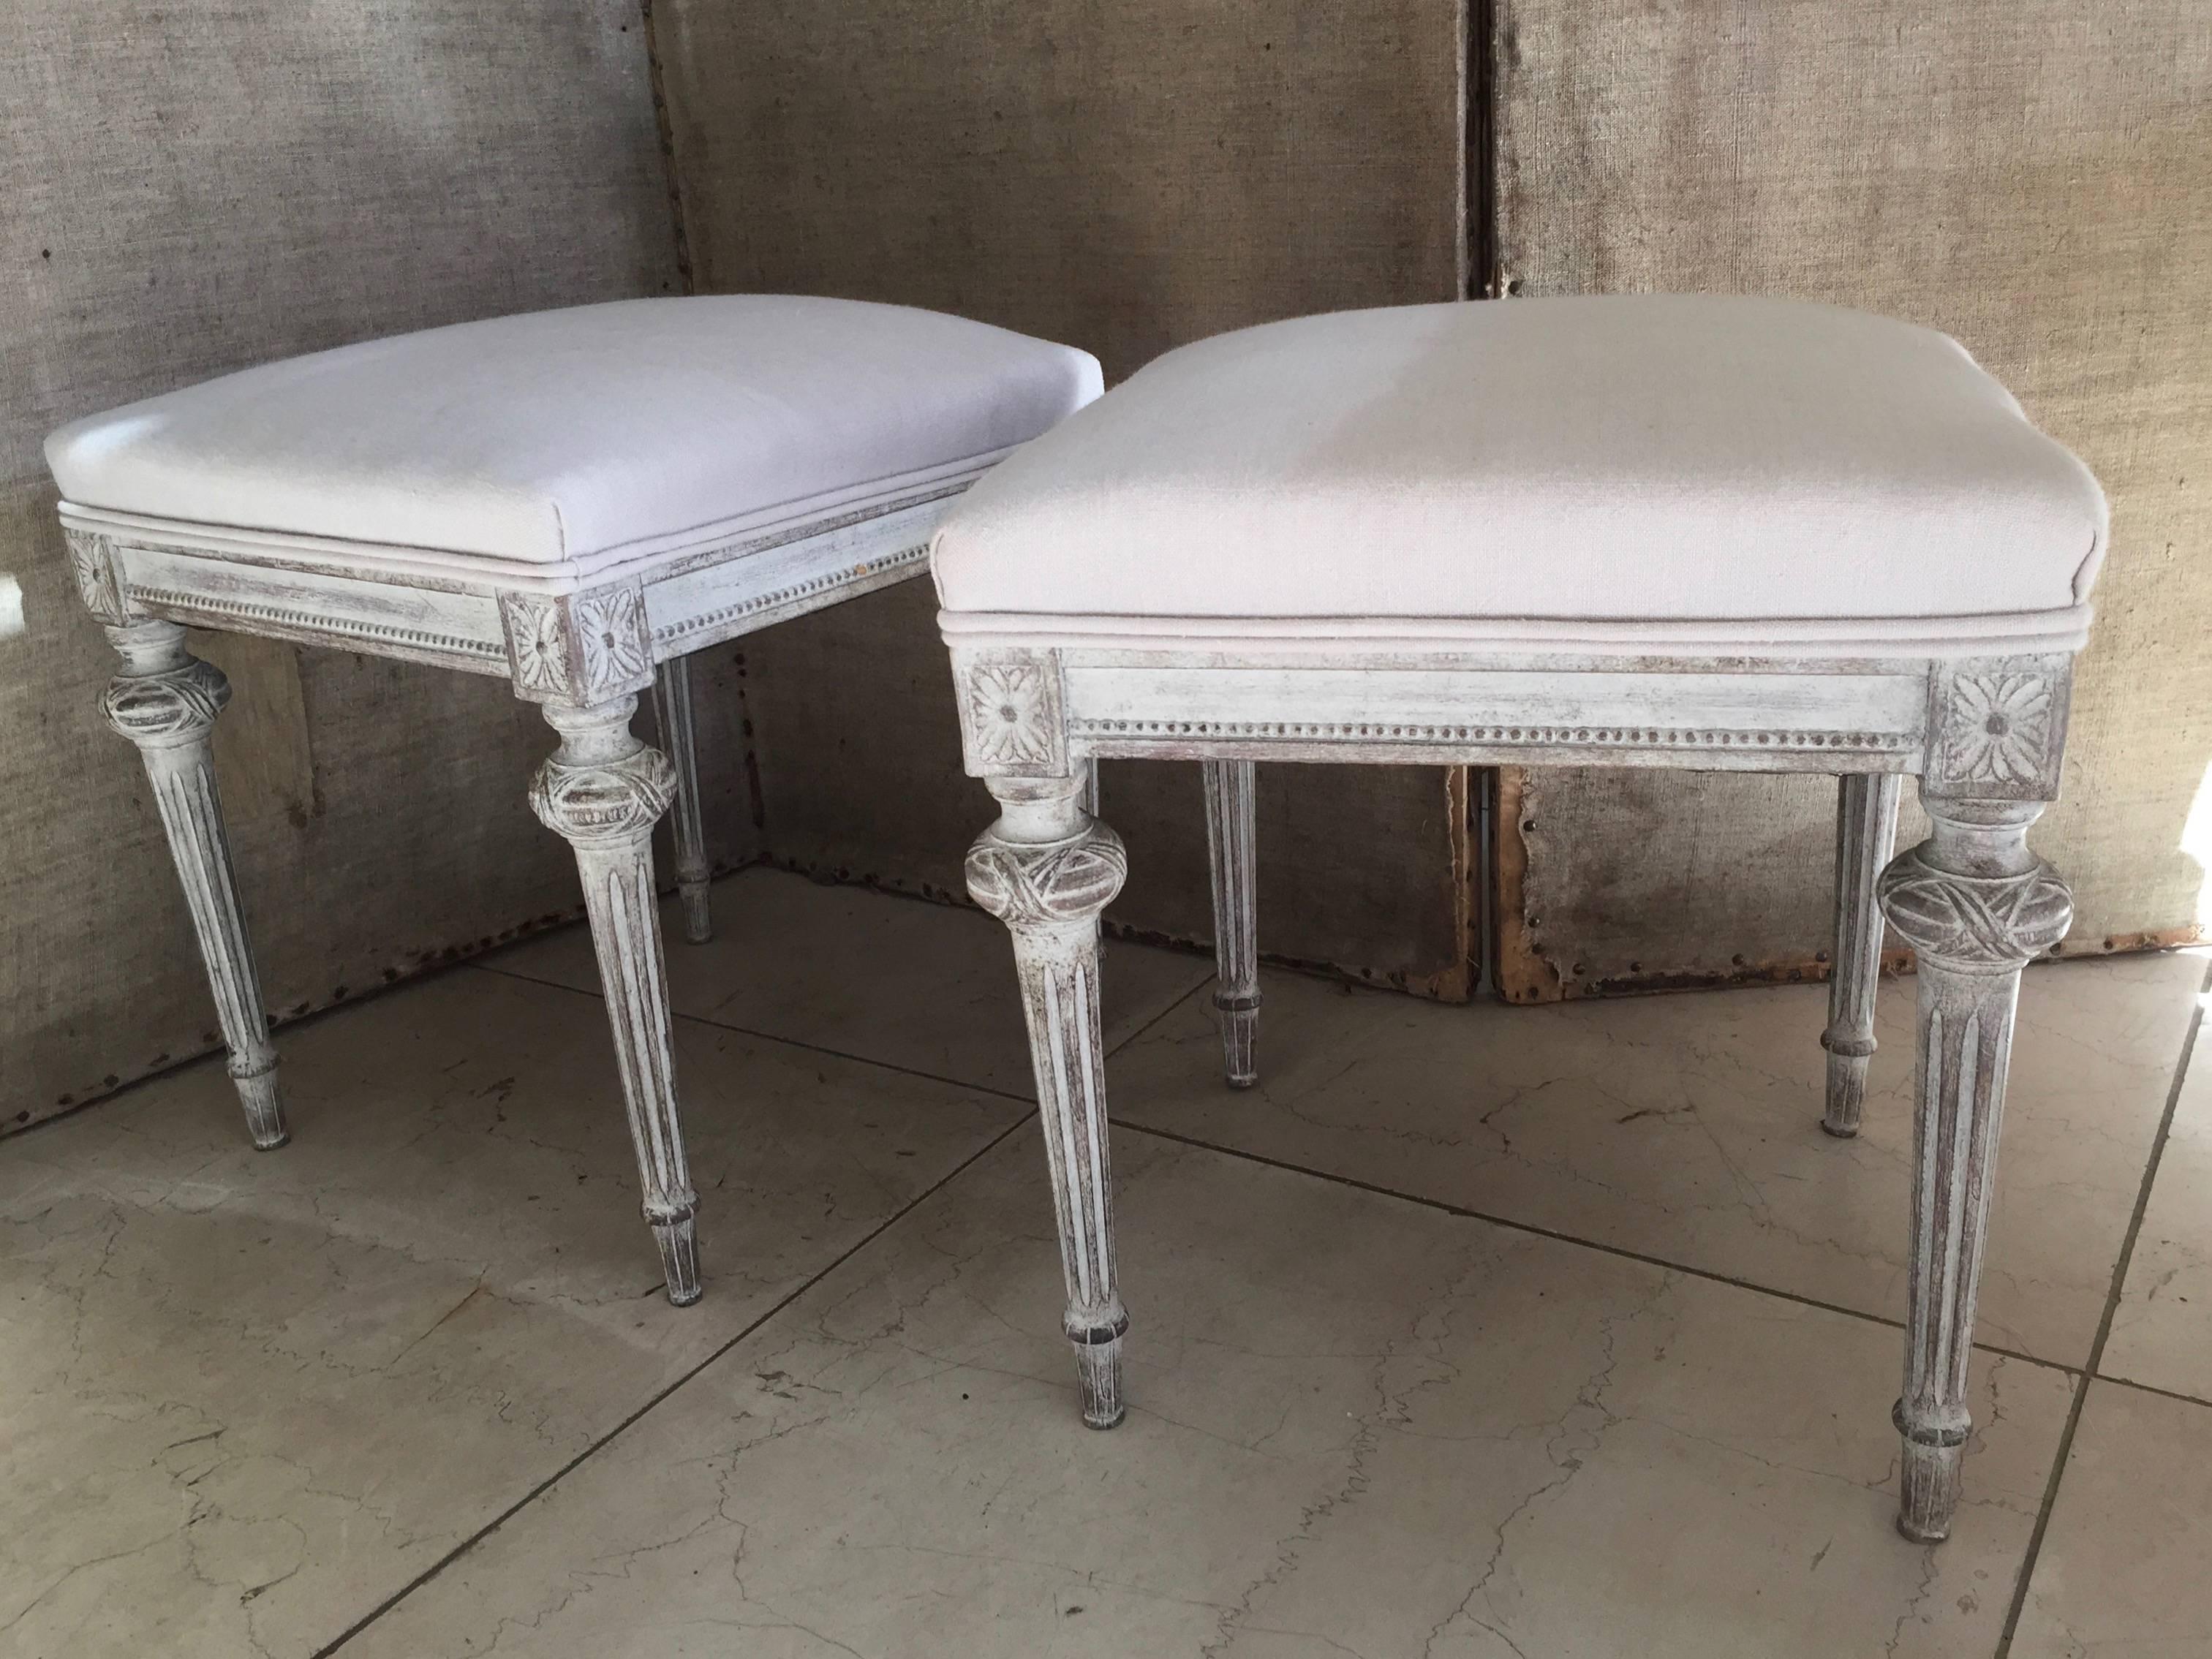 A pair of 19th century Gustavian stools with apron beautifully carved in bead string design and flower rosettes at each corner. Upholstered in linen.
Sweden, circa 1840.
Seat size: 17 W